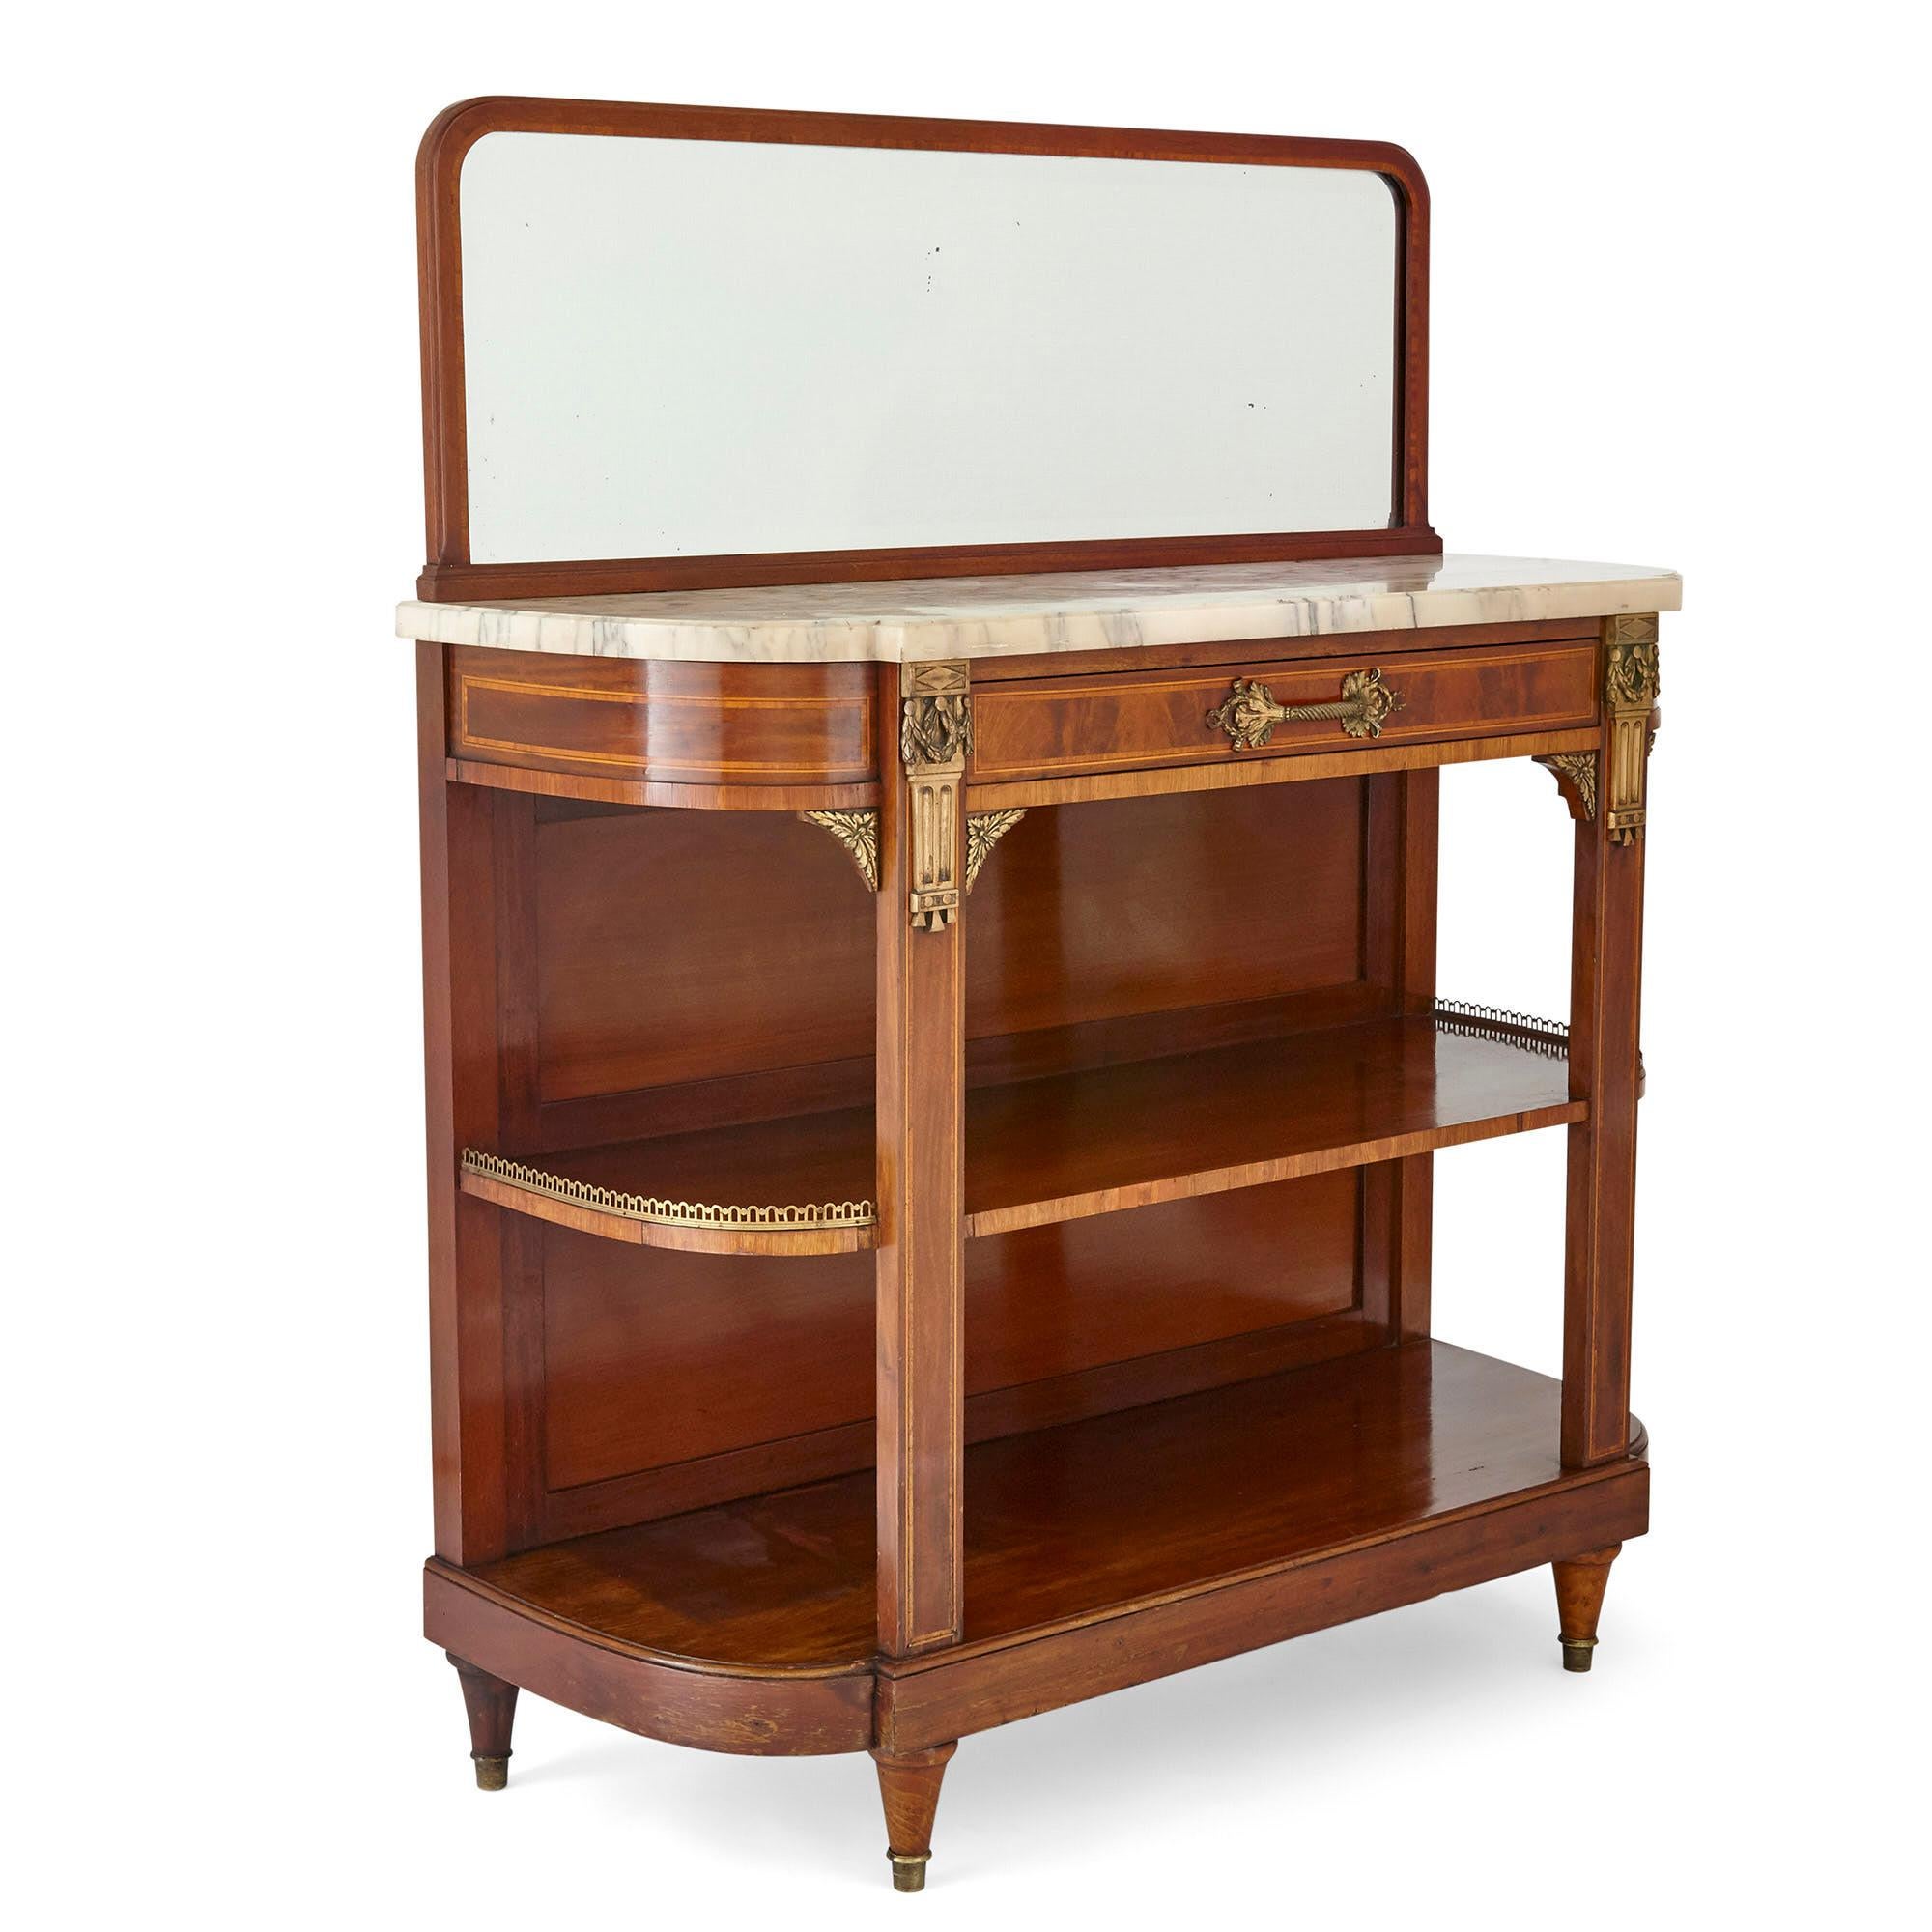 Crafted from mahogany inlaid with a variety of veneers, and mounted with beautiful gilt bronze, this Louis XVI style mirror-topped side table would make a beautiful addition to any room.

The table is inset with a Serravezza Breccia marble top,